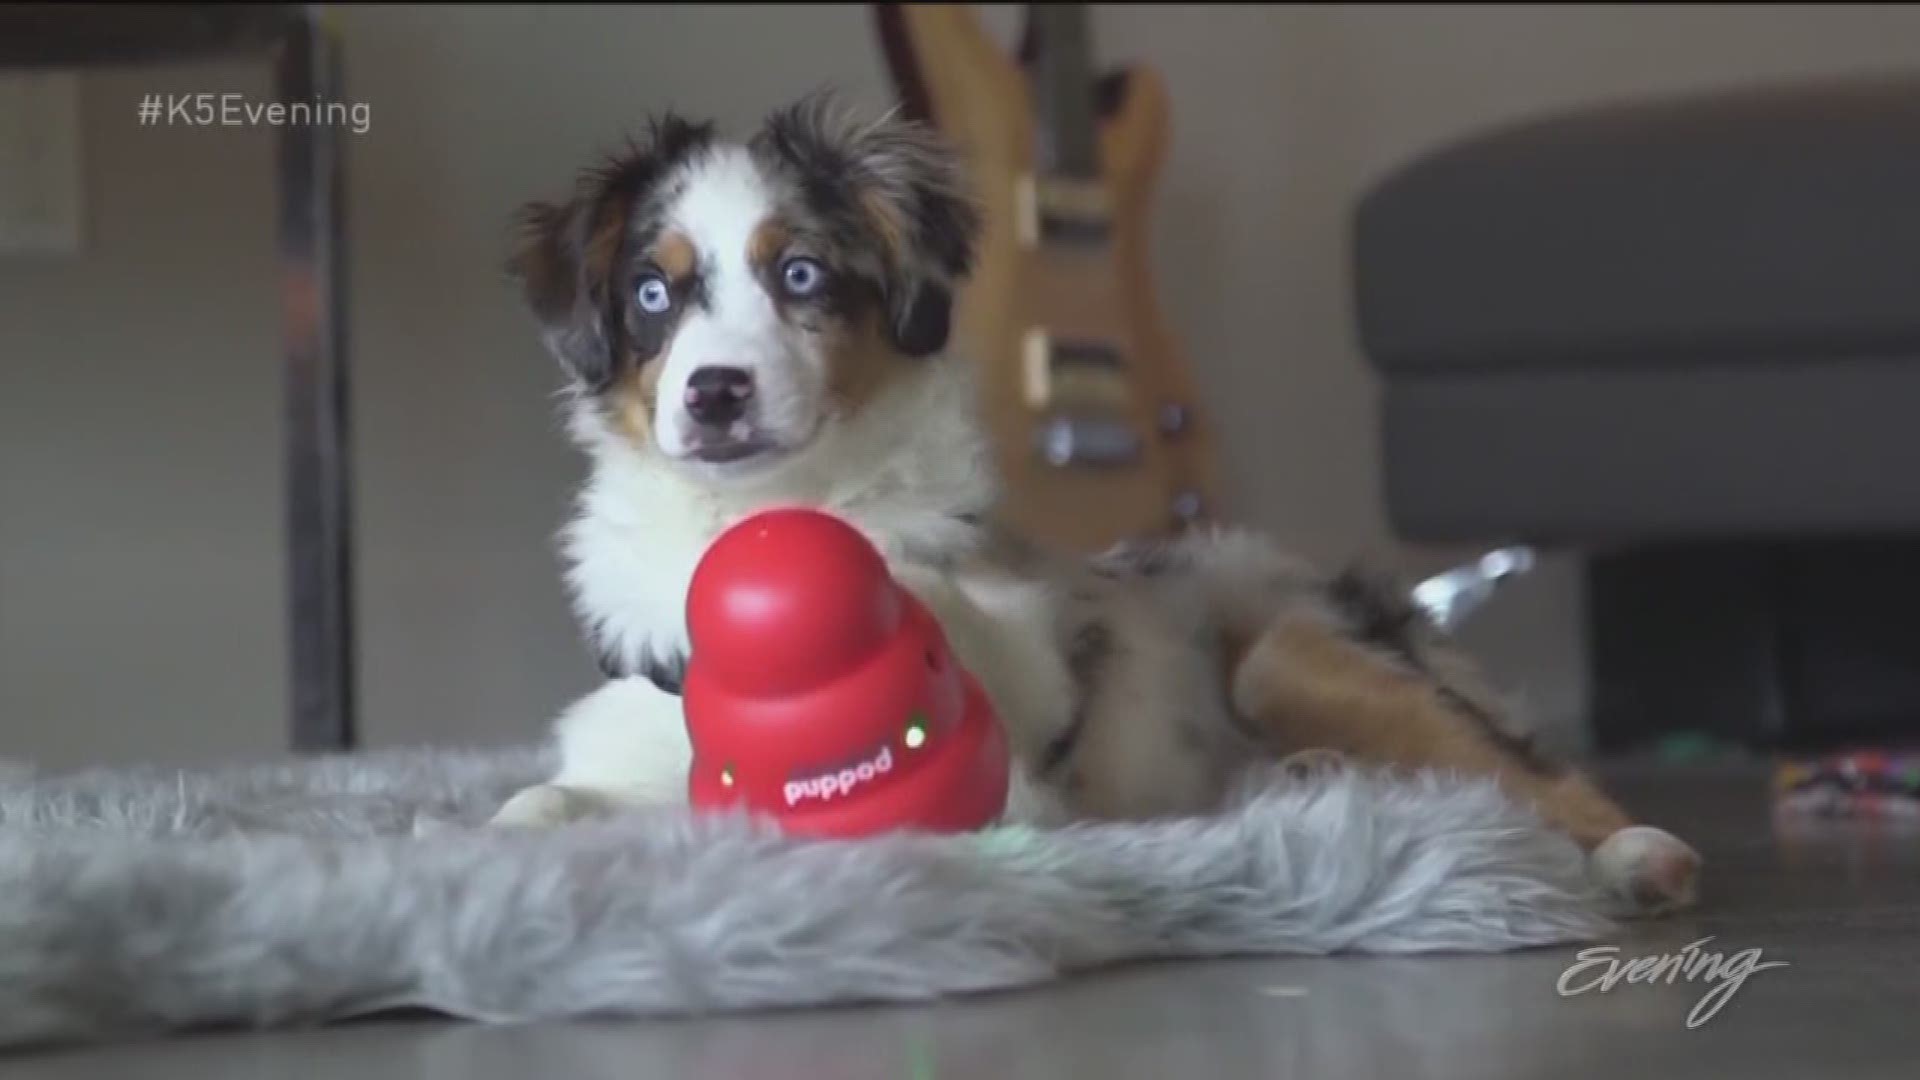 The PupPod is the first toy designed to increase doggy brainpower. "It's pretty revolutionary there's nothing in the market like this," said Kirkland's Erick Eidus who developed the toy, which uses lights and sounds to keep dogs busy.